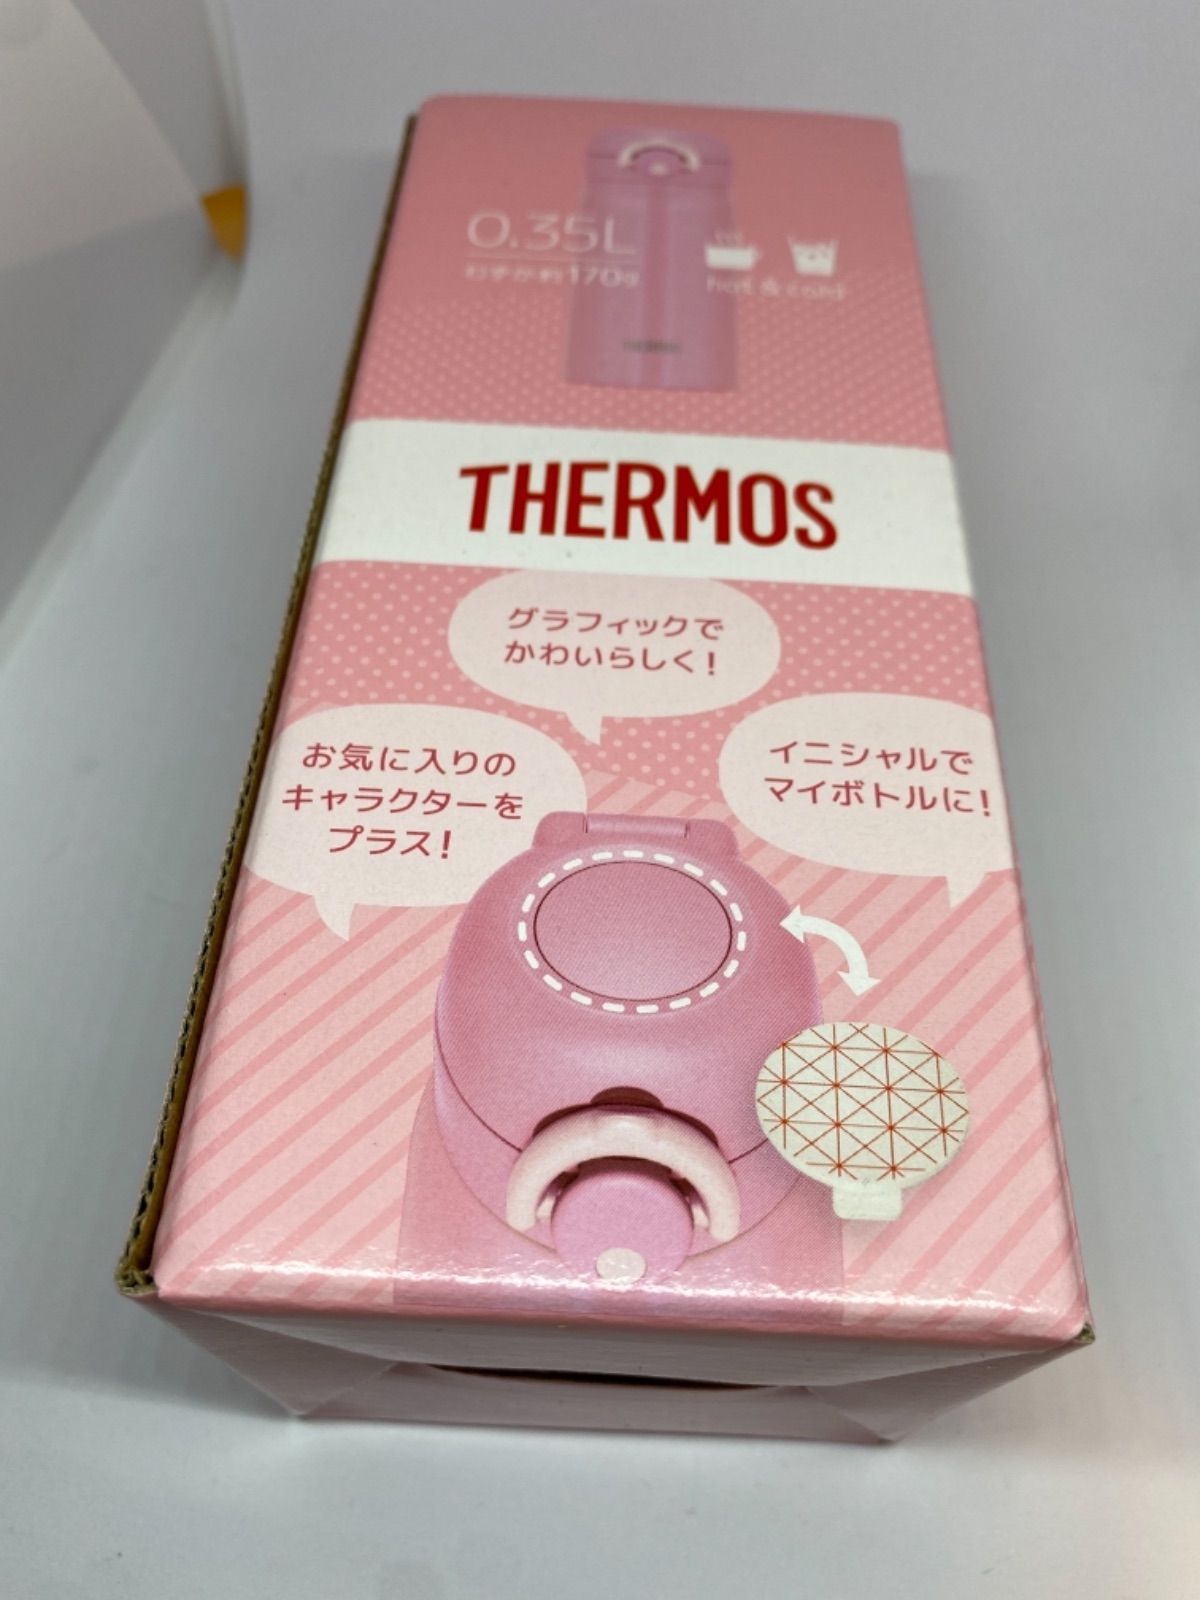 THERMOS JNR-351(P) PINK サーモス　ピンク　水筒